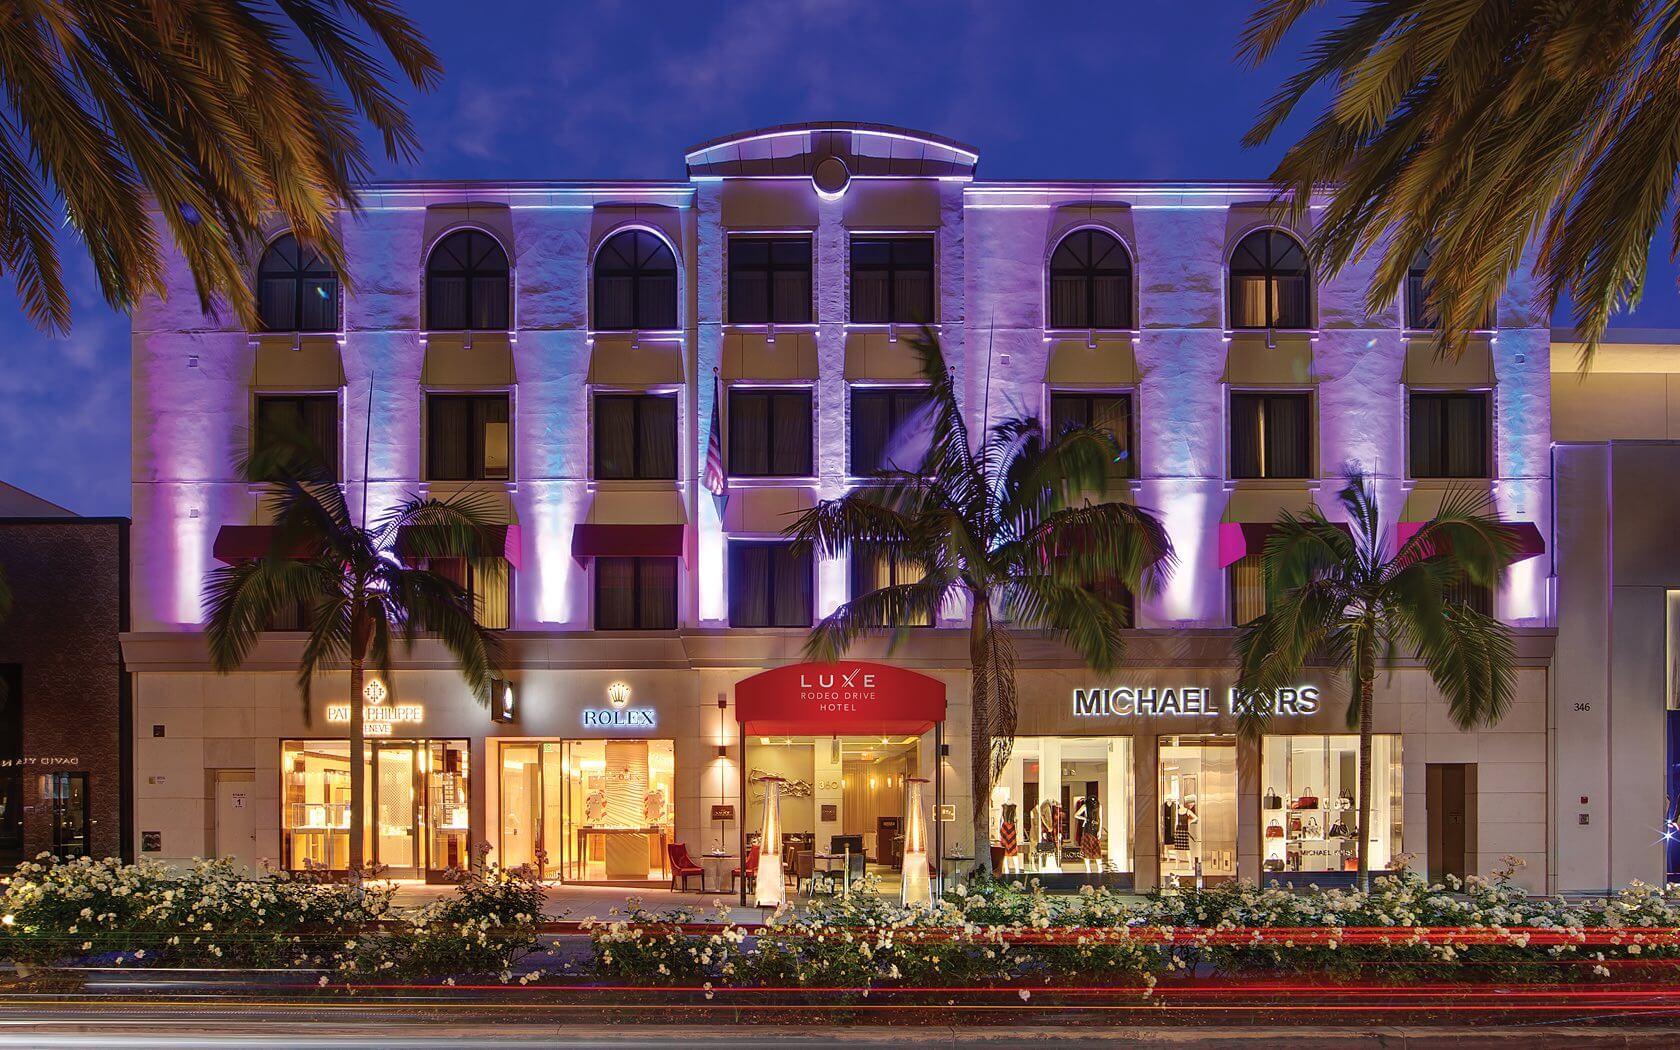 Luxe Rodeo Drive Hotel - sample desc